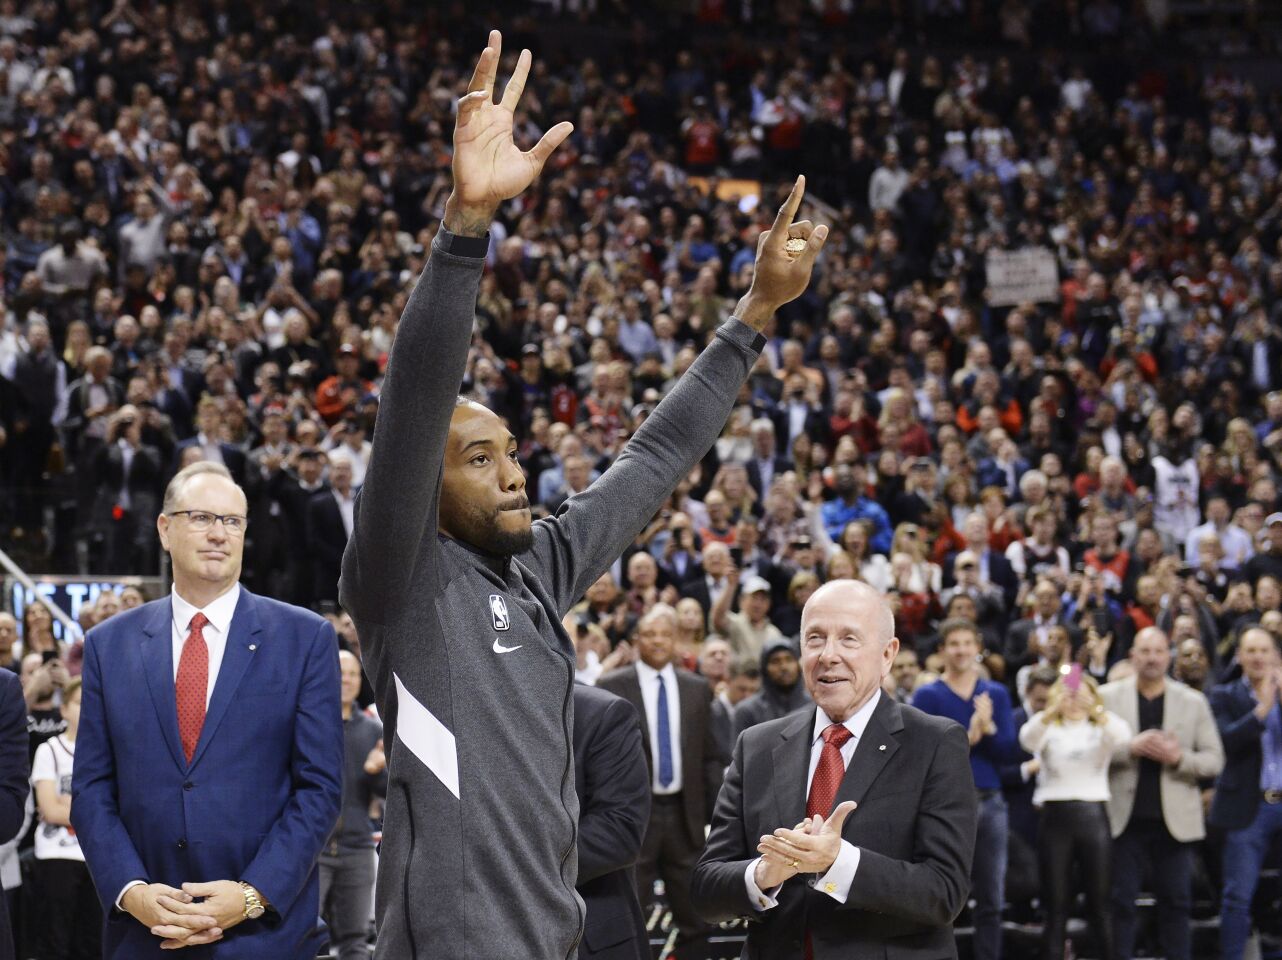 Kawhi Leonard salutes the crowd after receiving his 2019 NBA championship ring before a game between the Clippers and the Raptors.